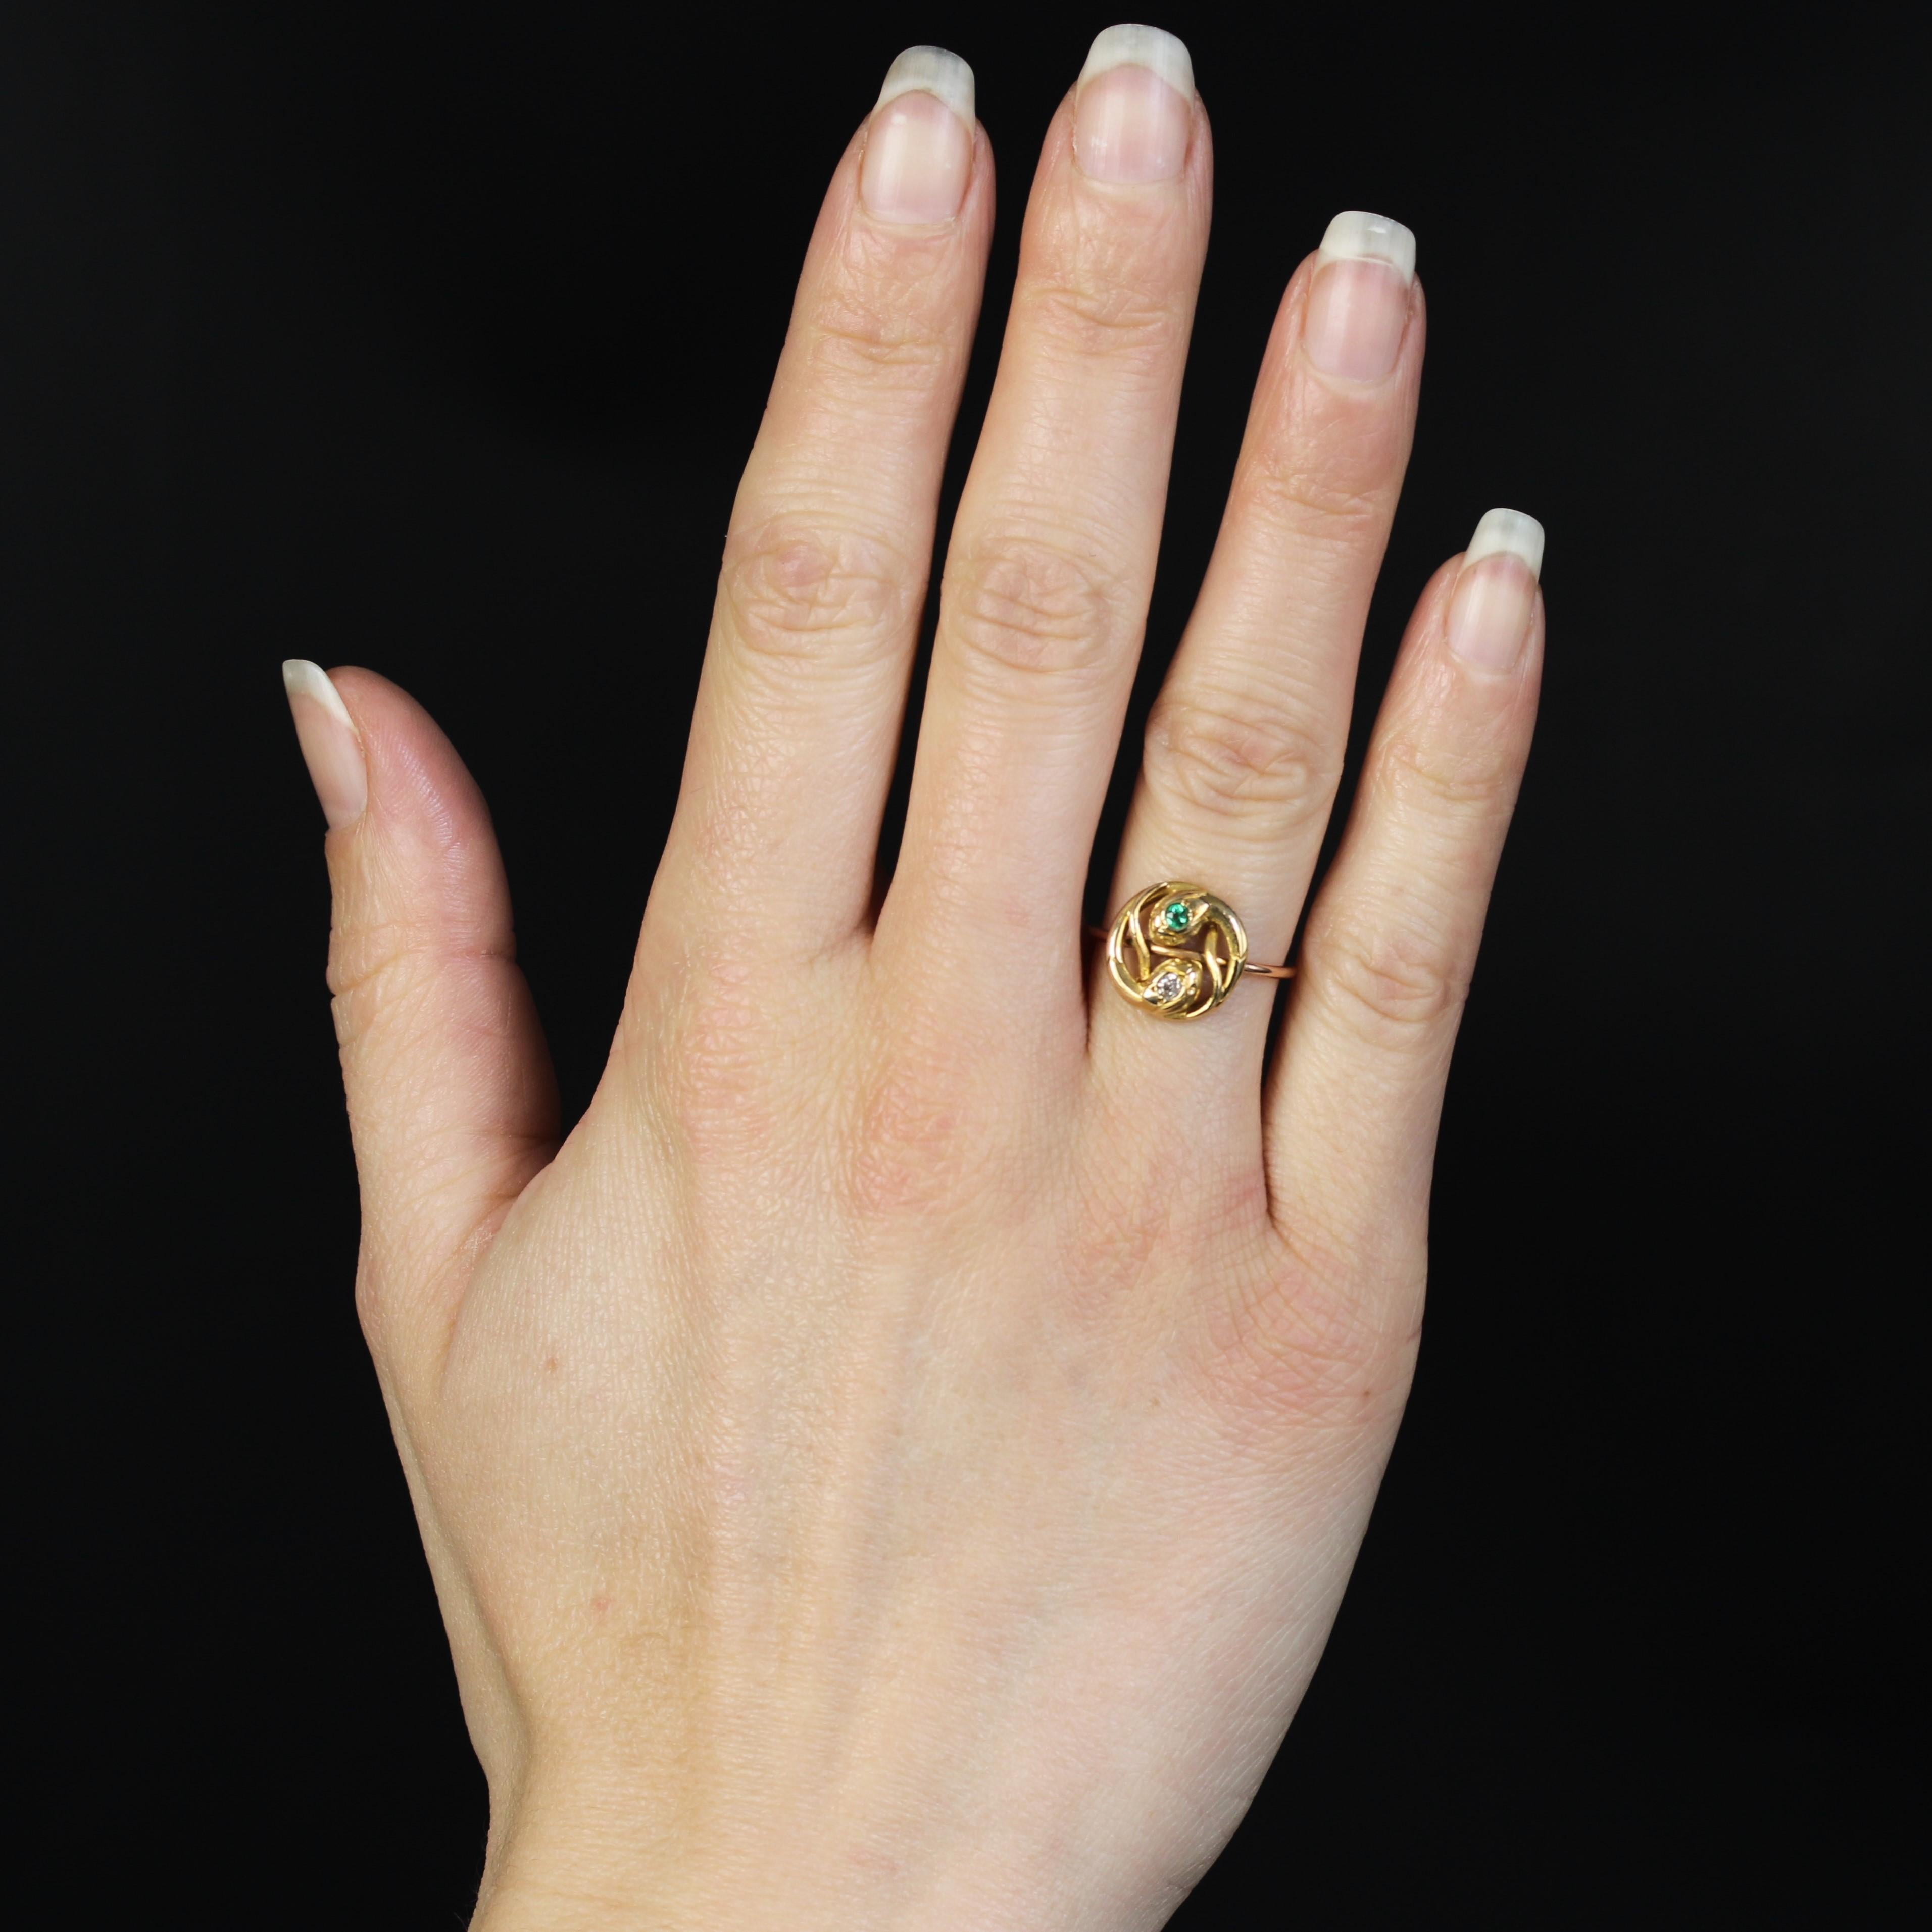 Ring in 18 karat rose and yellow gold, horse head hallmark.
This charming ring is set with 2 intertwined snakes, one with a round emerald and the other with an antique-cut brilliant-cut diamond. The ring is a round rose gold wire.
Height : 12 mm